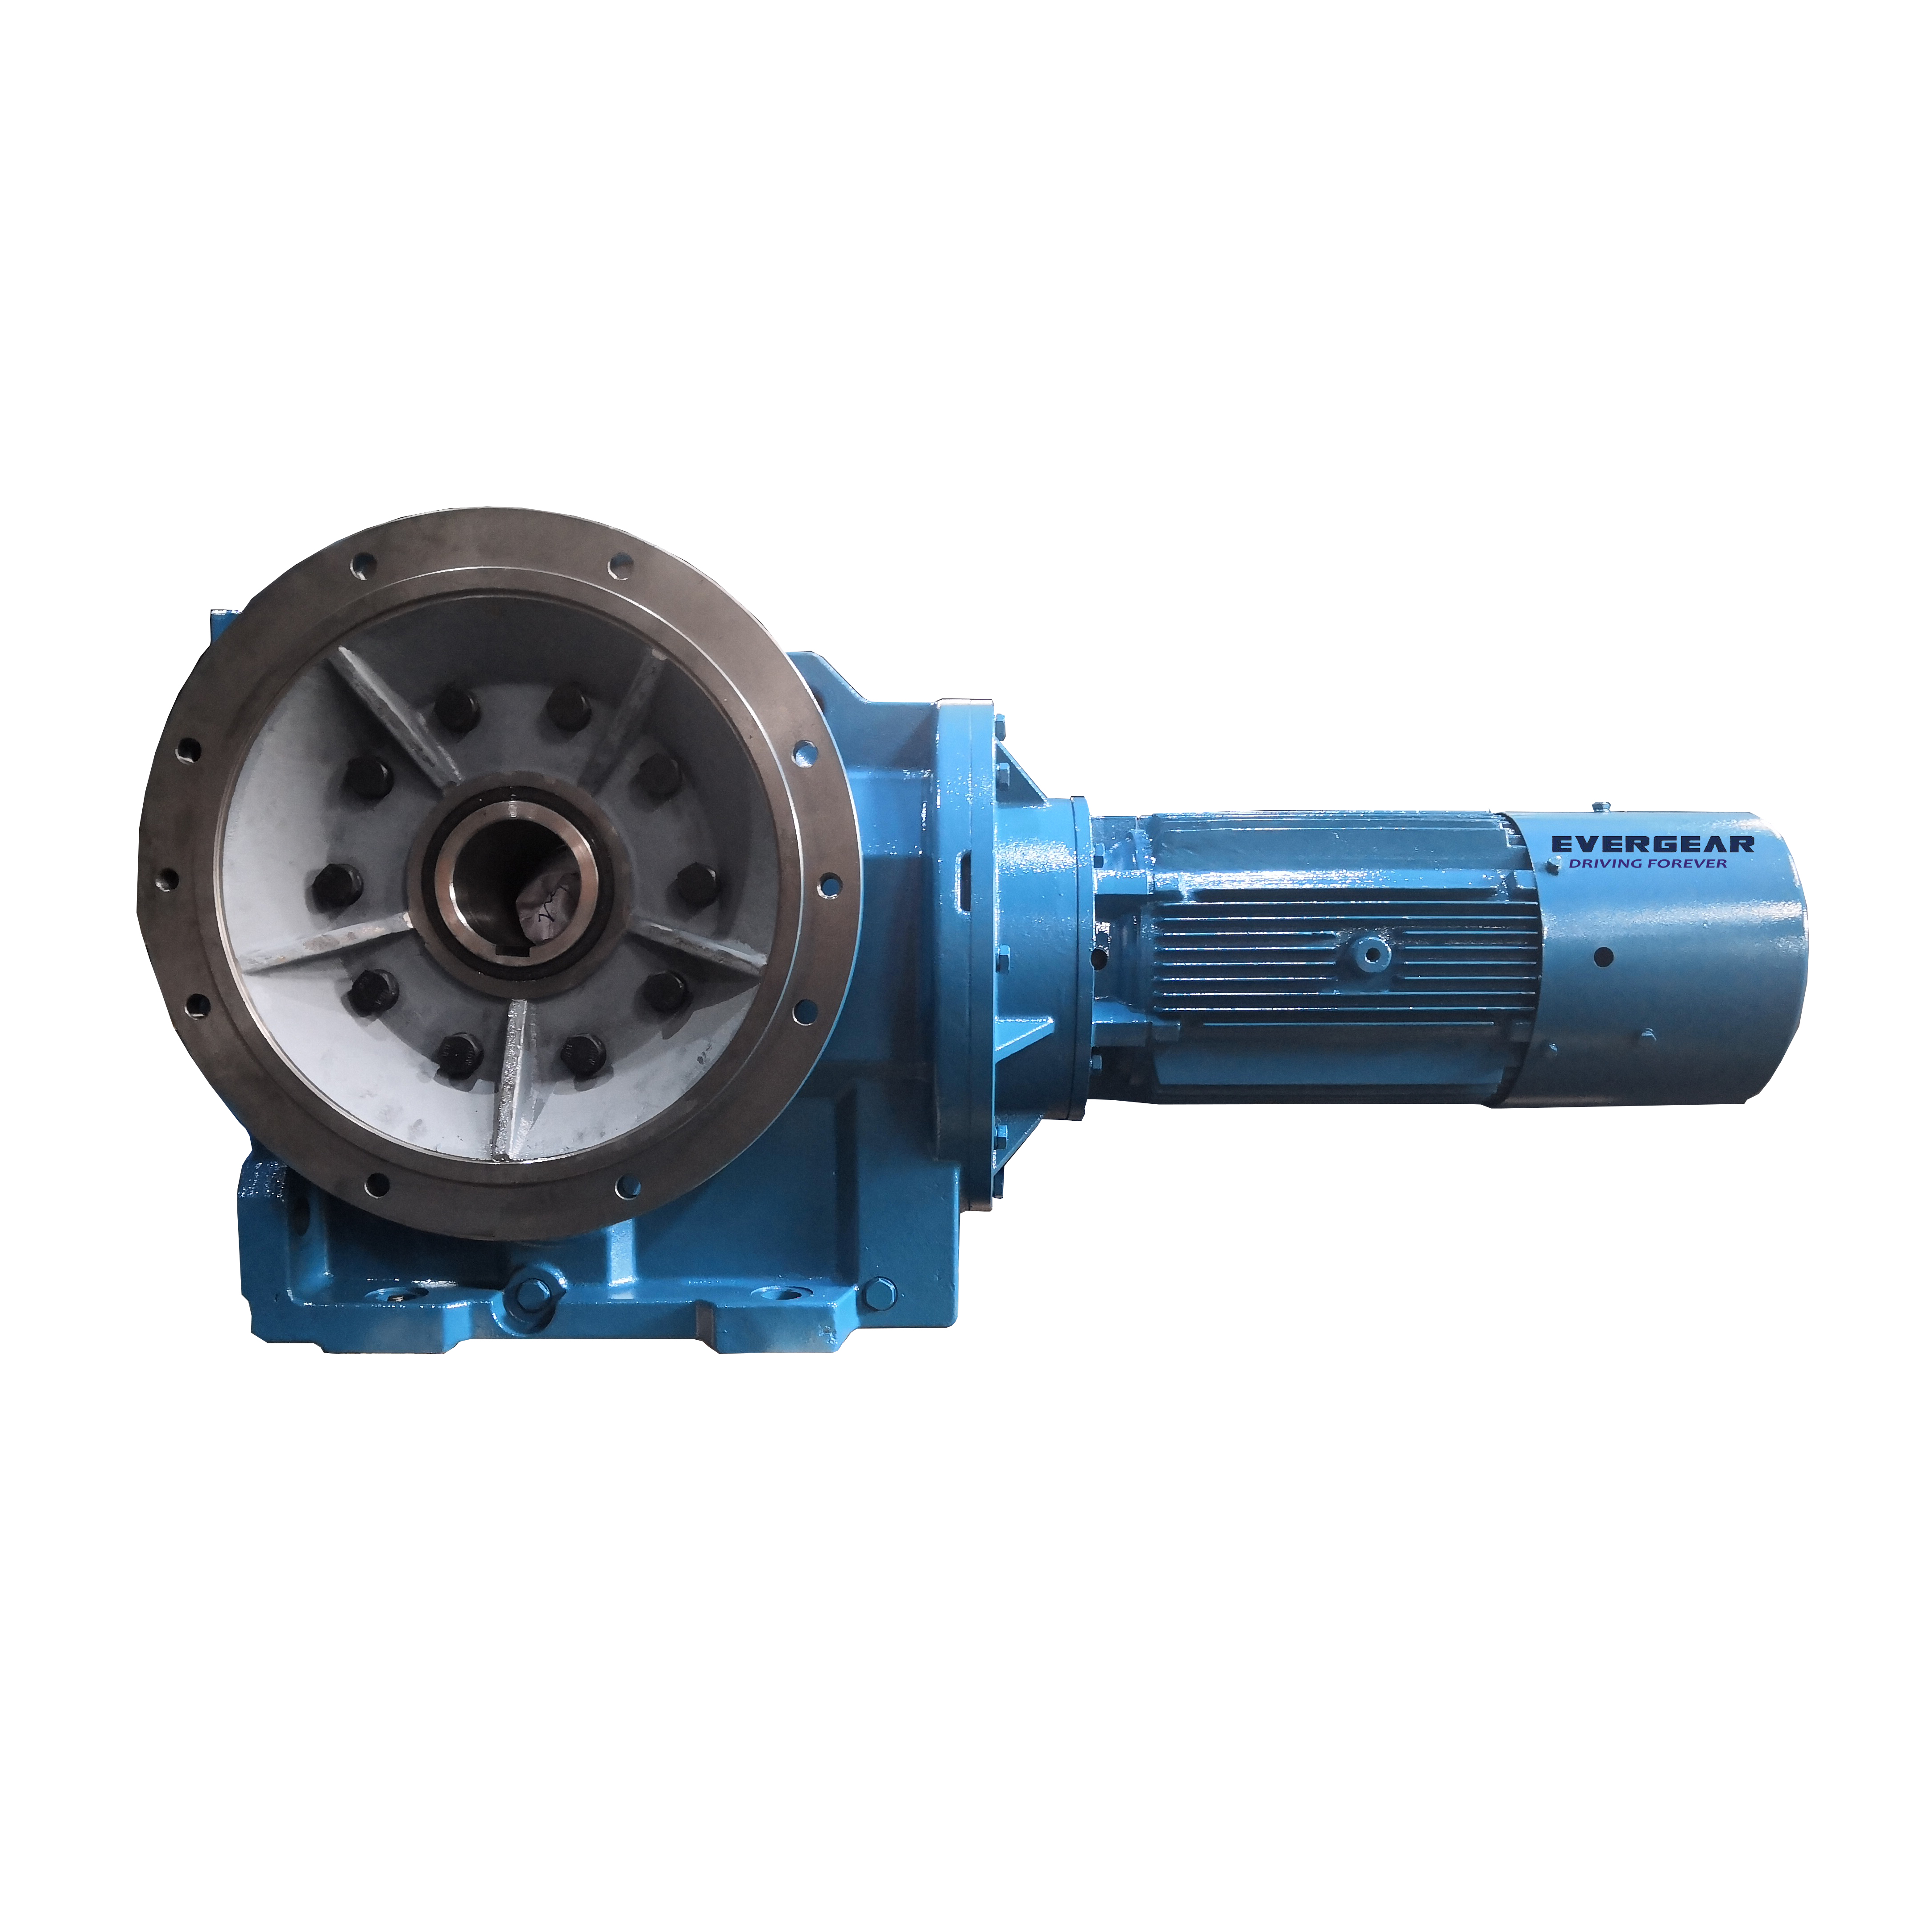 EVERGEAR K series motor reductor 400v 30 kw helic bevel right angle gearbox price